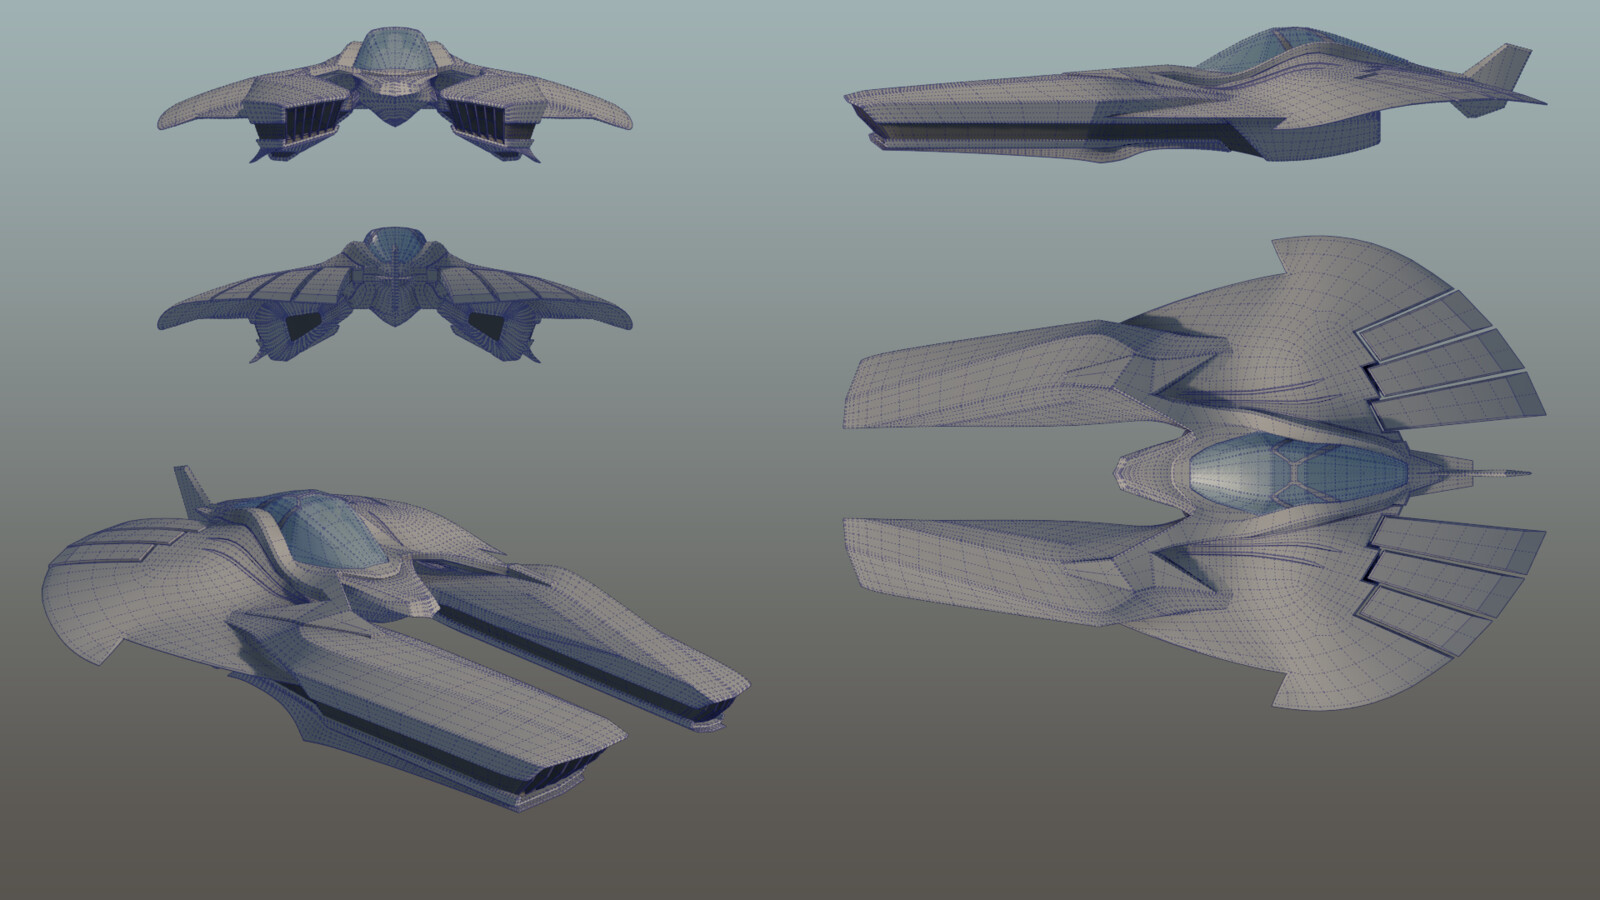 High-res. Refined shapes and bone lines. Added more taper to the front engines.